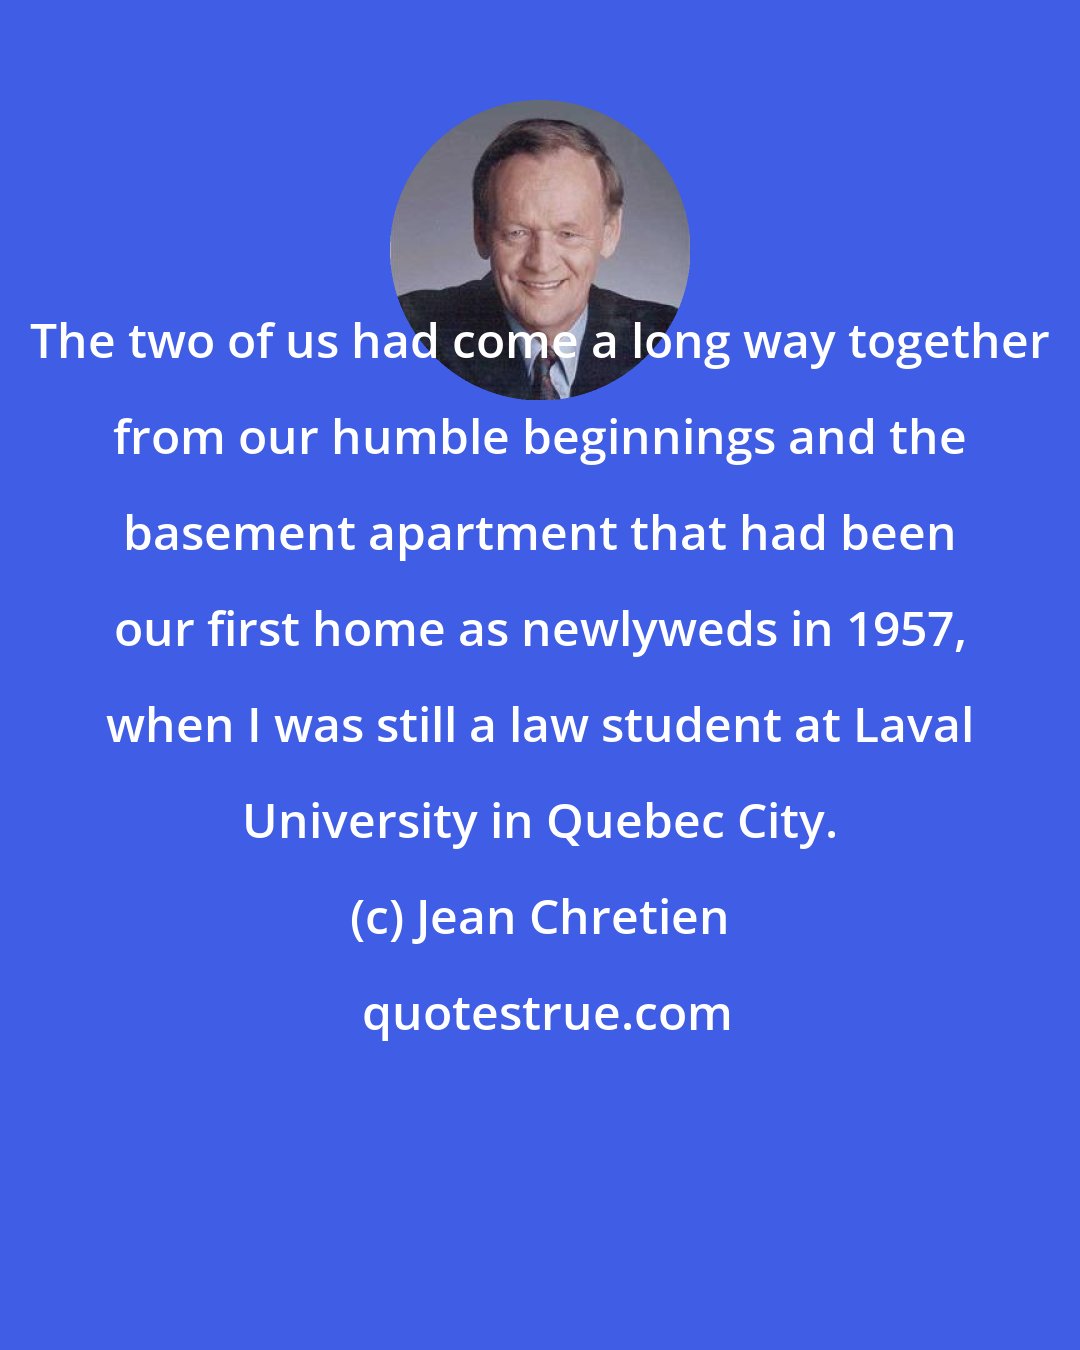 Jean Chretien: The two of us had come a long way together from our humble beginnings and the basement apartment that had been our first home as newlyweds in 1957, when I was still a law student at Laval University in Quebec City.